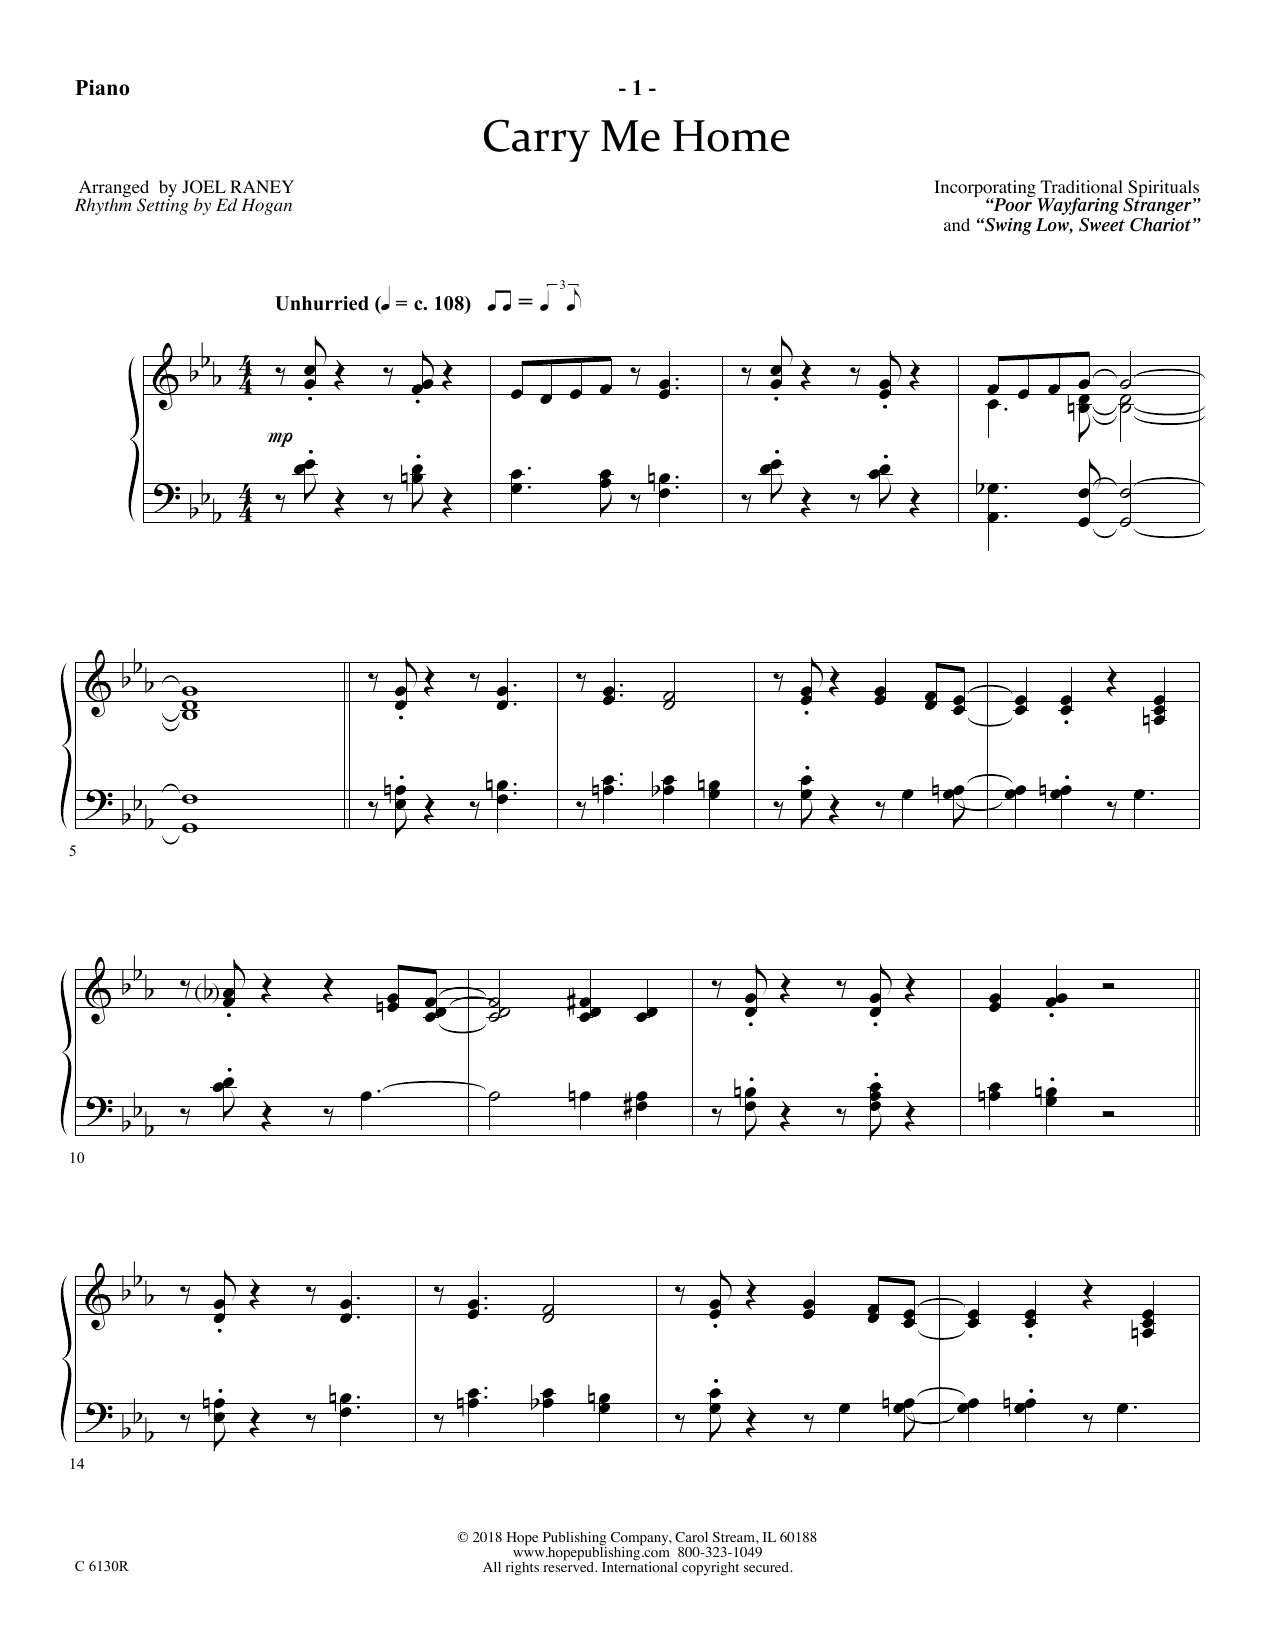 Download Joel Raney Carry Me Home - Piano Sheet Music